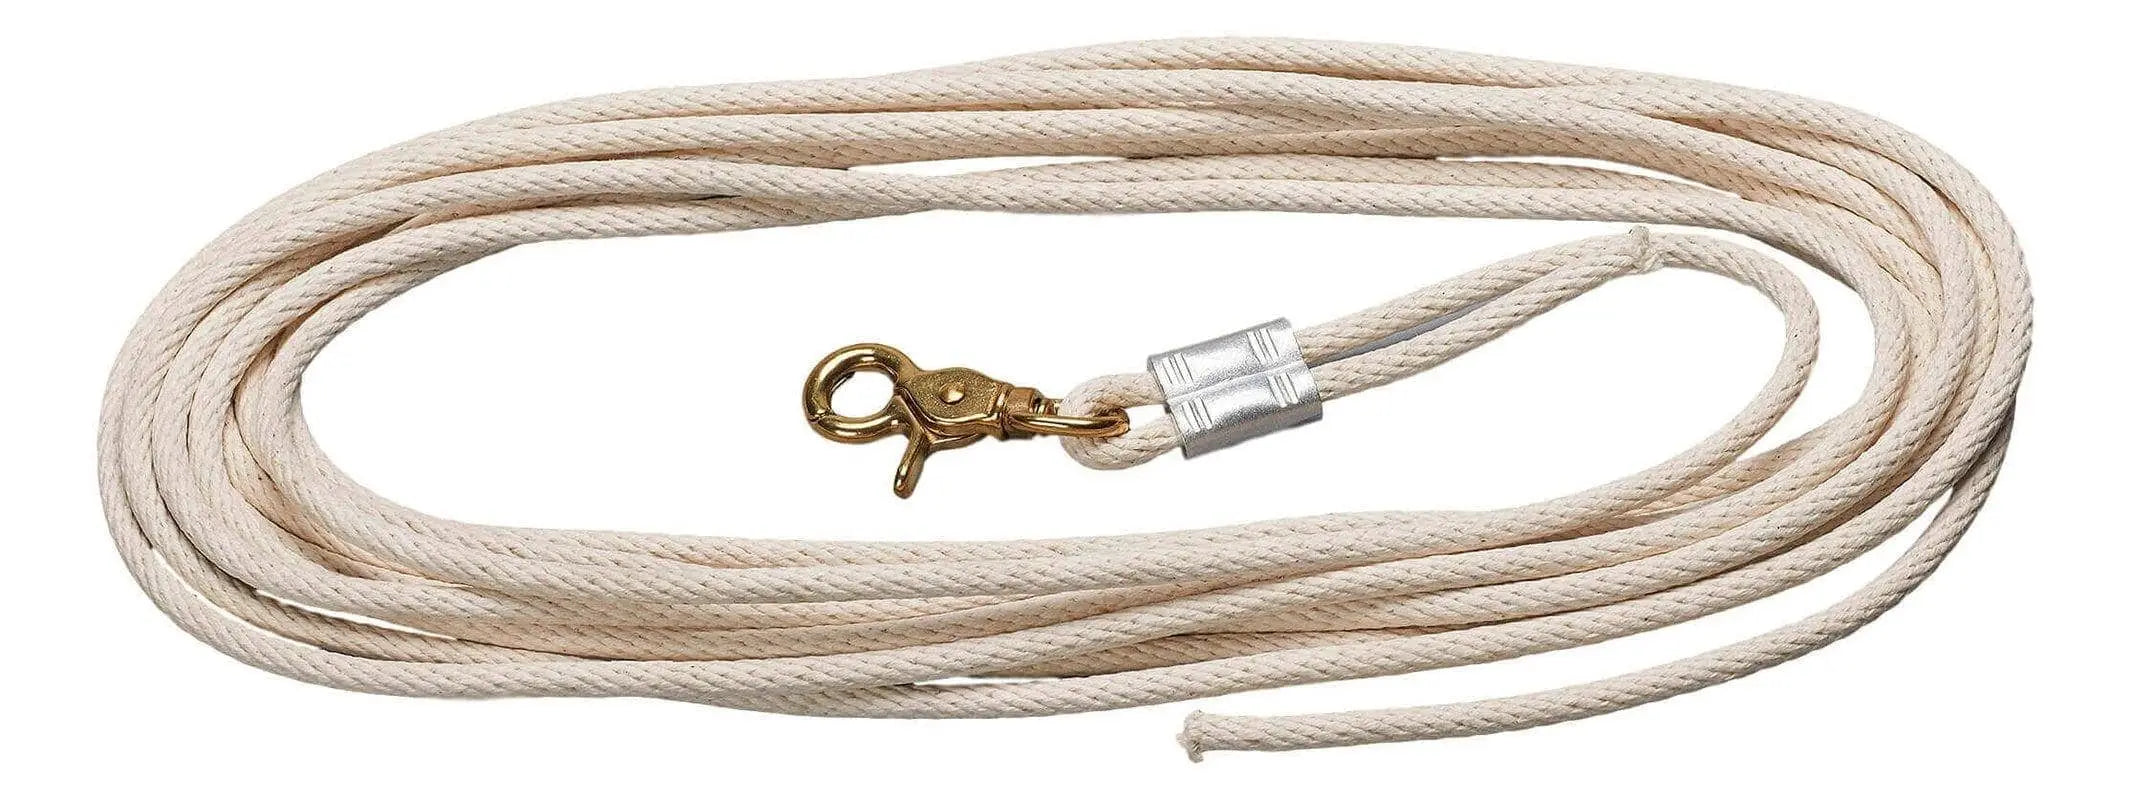 ROBINSON - Rope for Oil Thief, Marked Every 2 Feet.  33' Long - Becker Safety and Supply